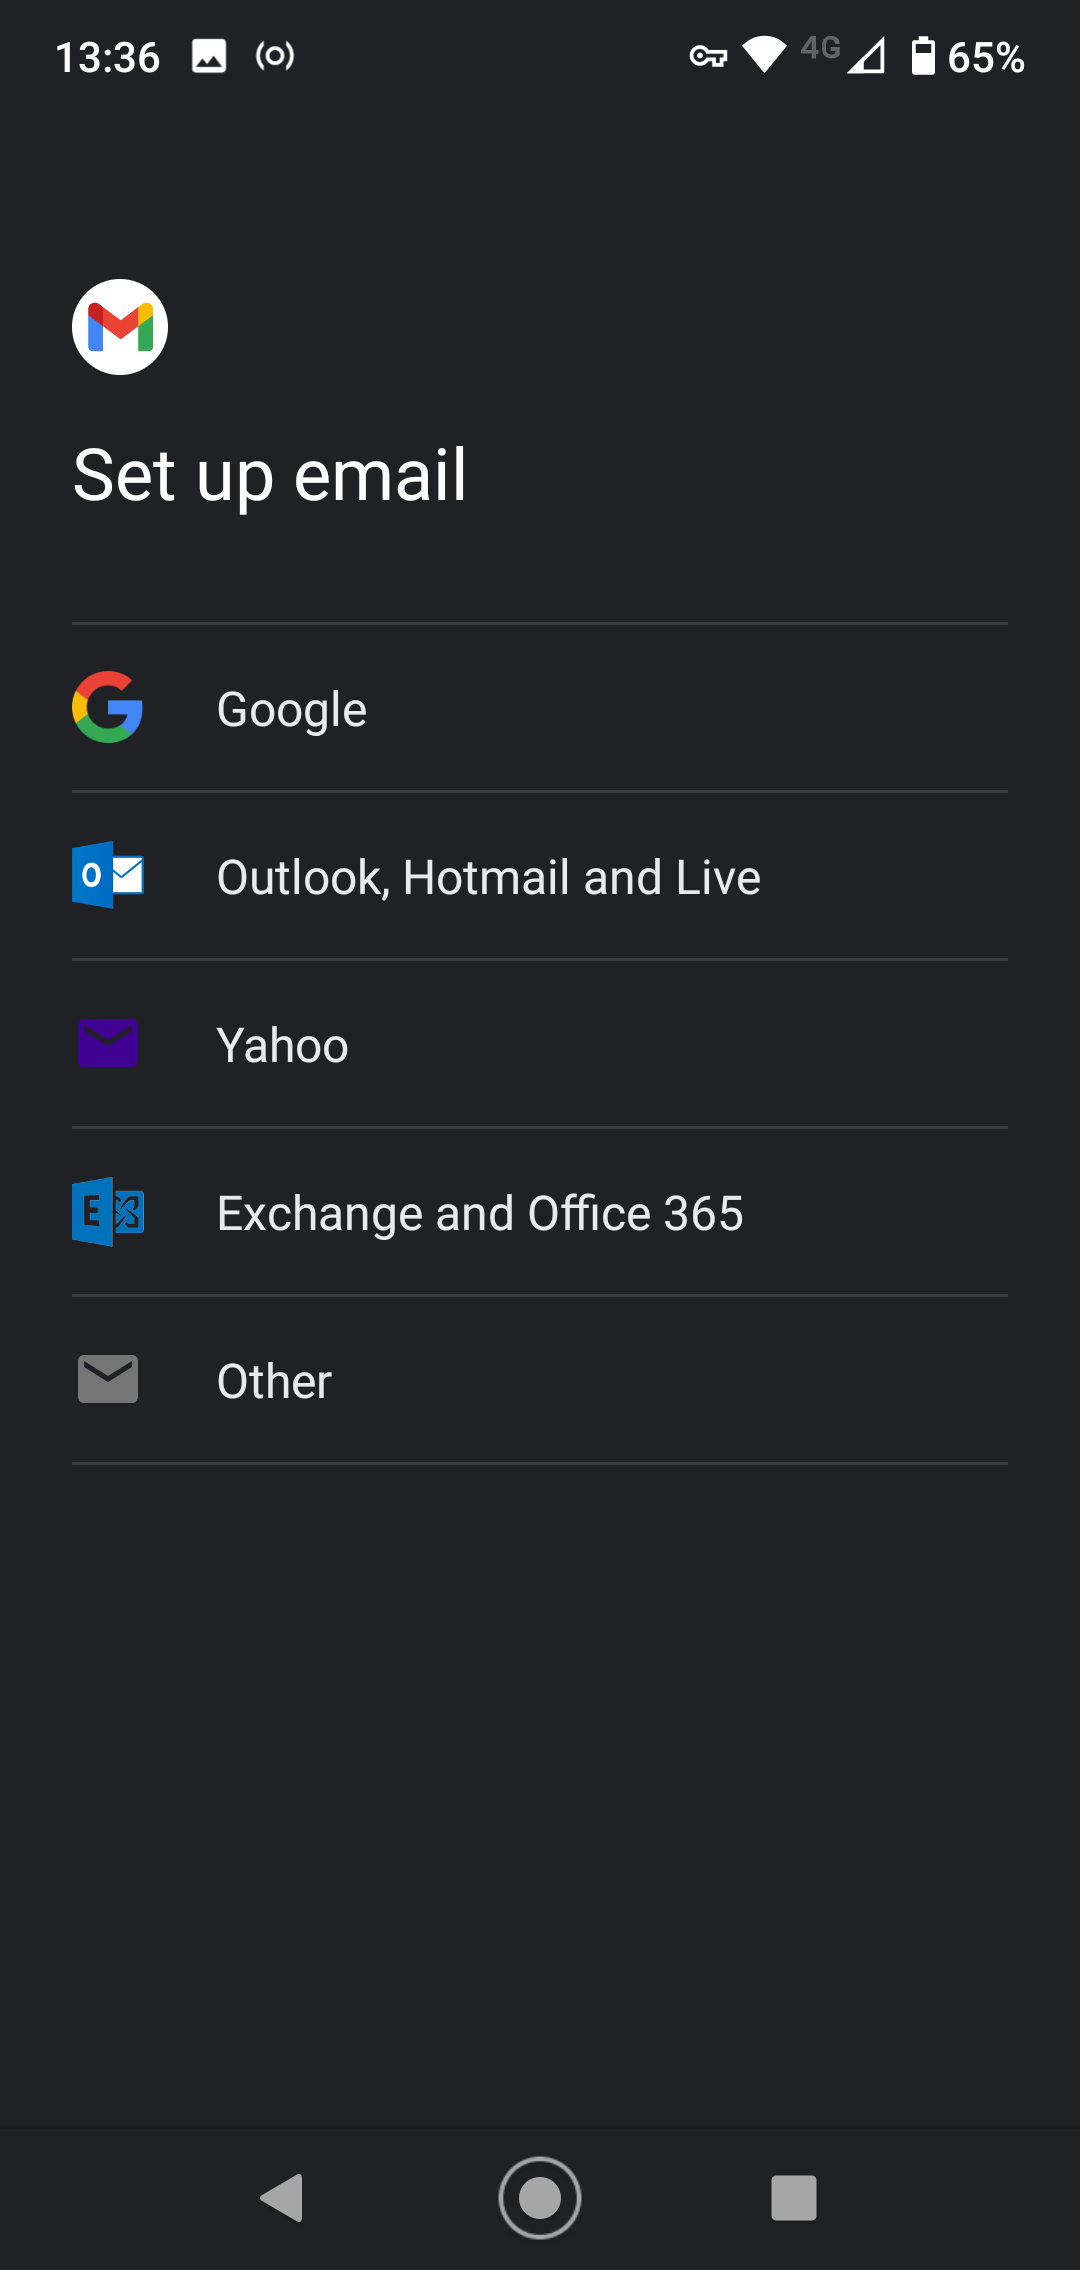 hotmail email settings for android